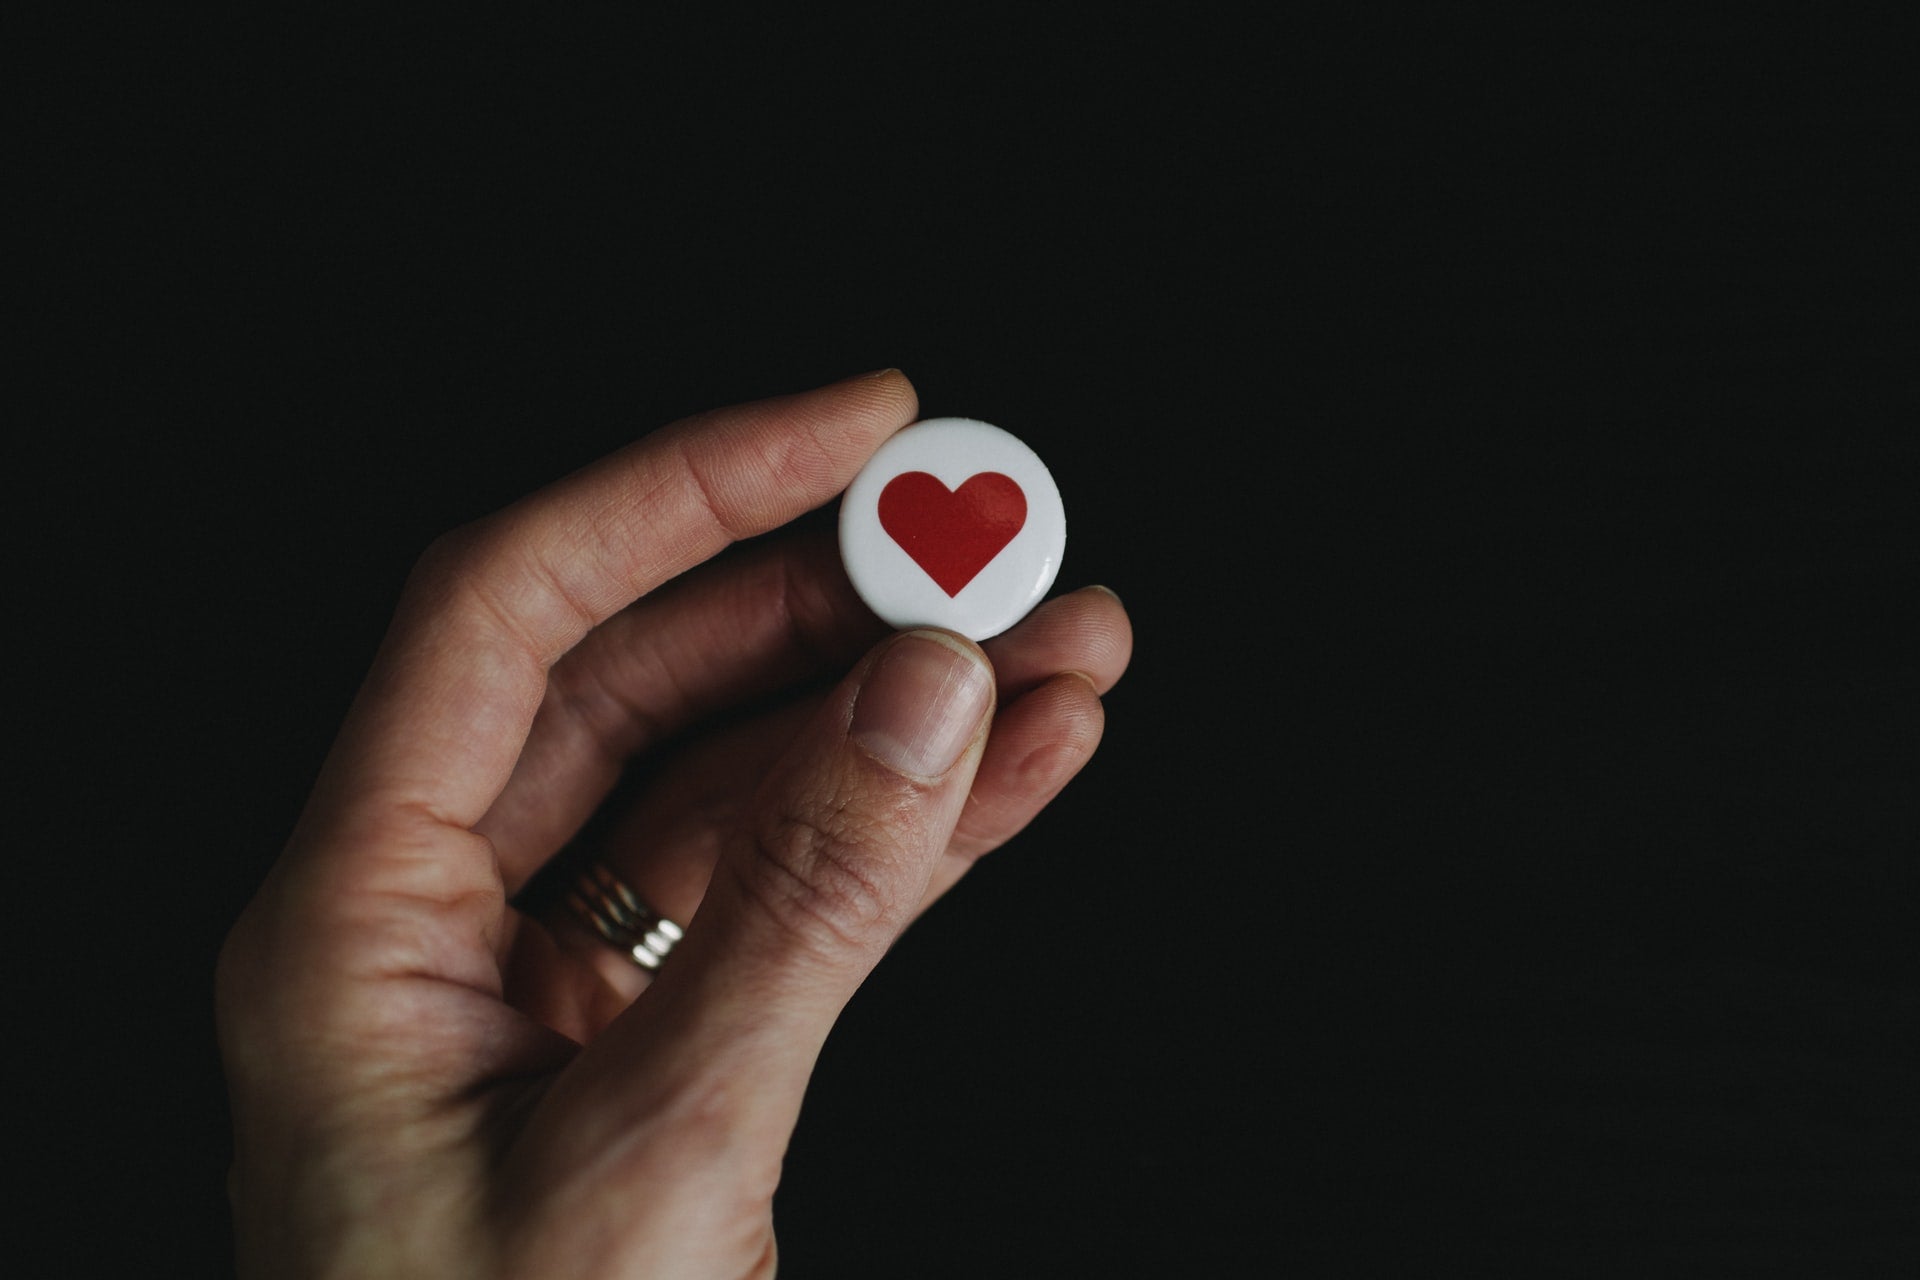 Hand holding a heart button representing a business trademark to be registered